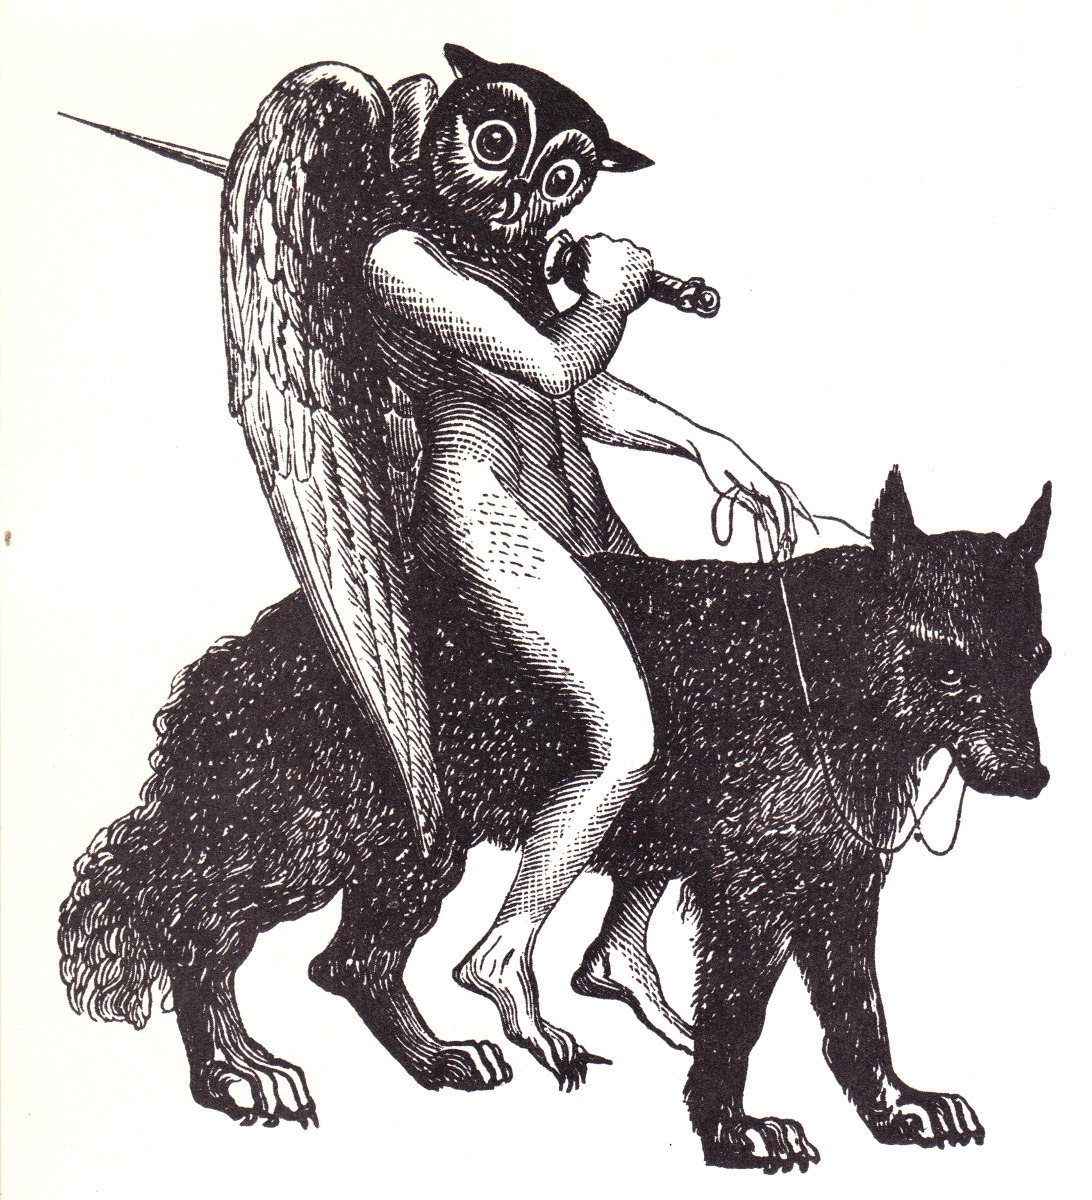 The demon Andras, who stirs up quarrels: from ‘Dictionnaire Infernal’ by Collin